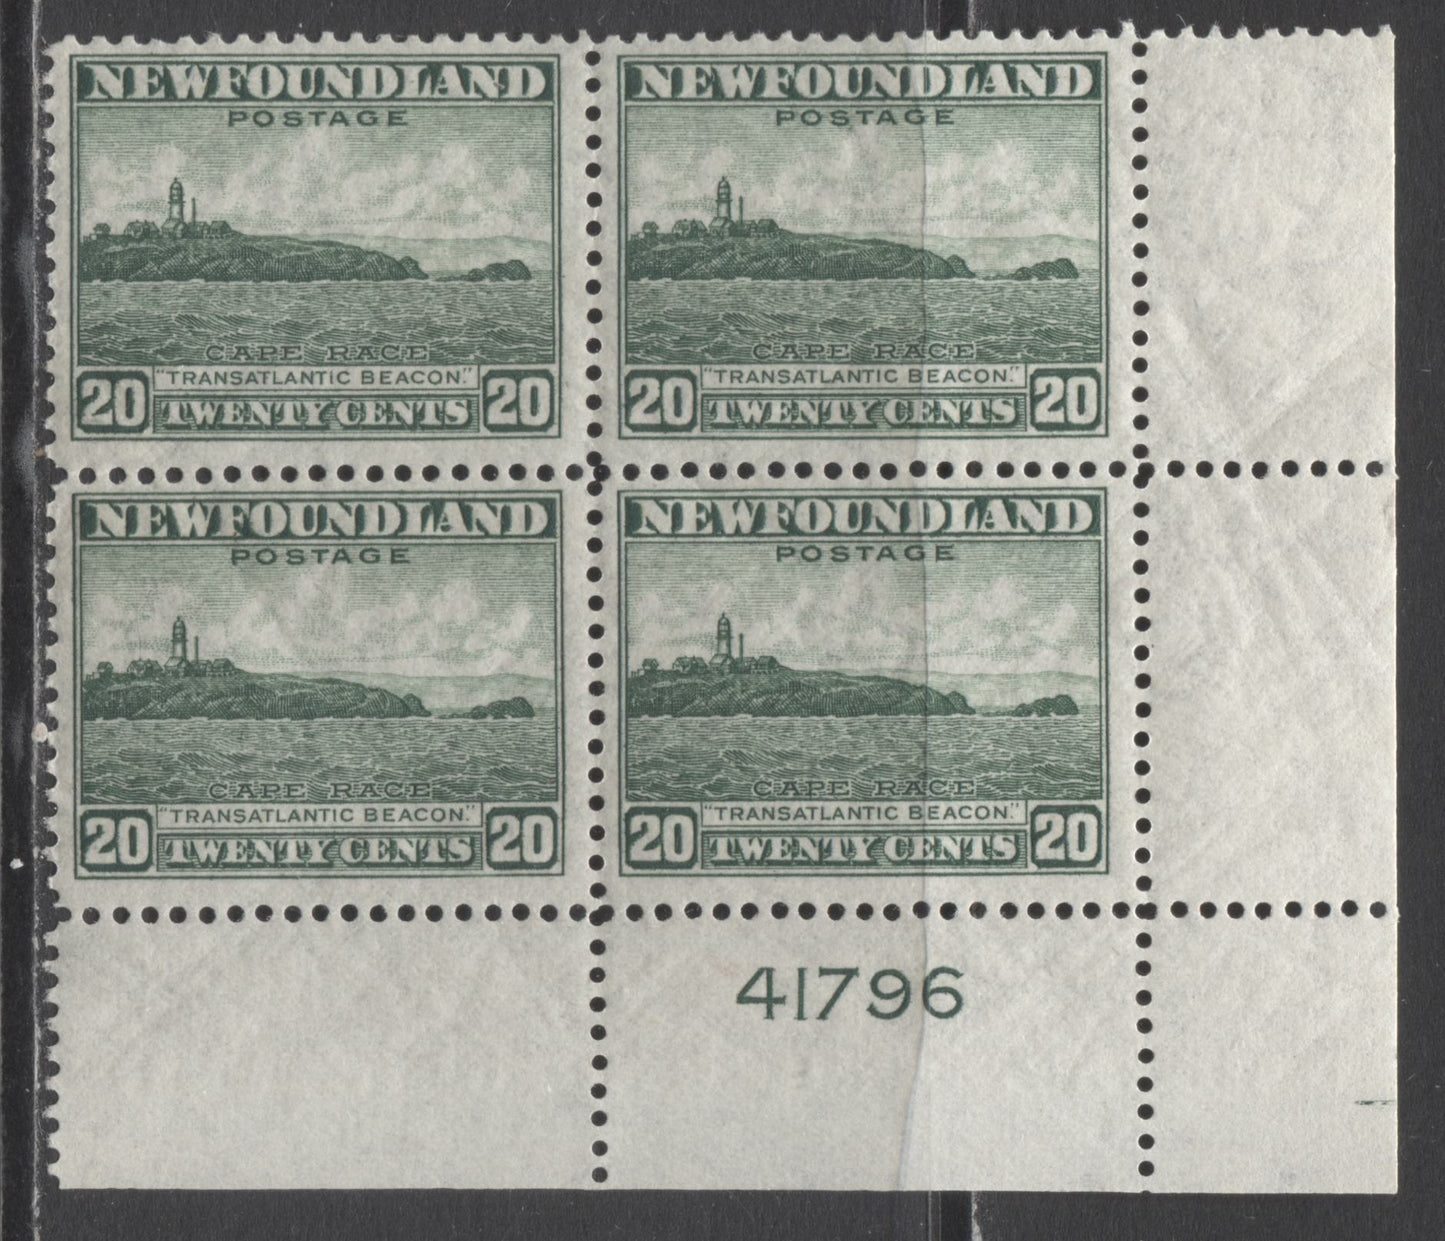 Lot 236 Newfoundland #263 20c Green Cape Race, 1941-1944 Resources Re-Issue, A FNH LR Plate 41796 Block Of 4